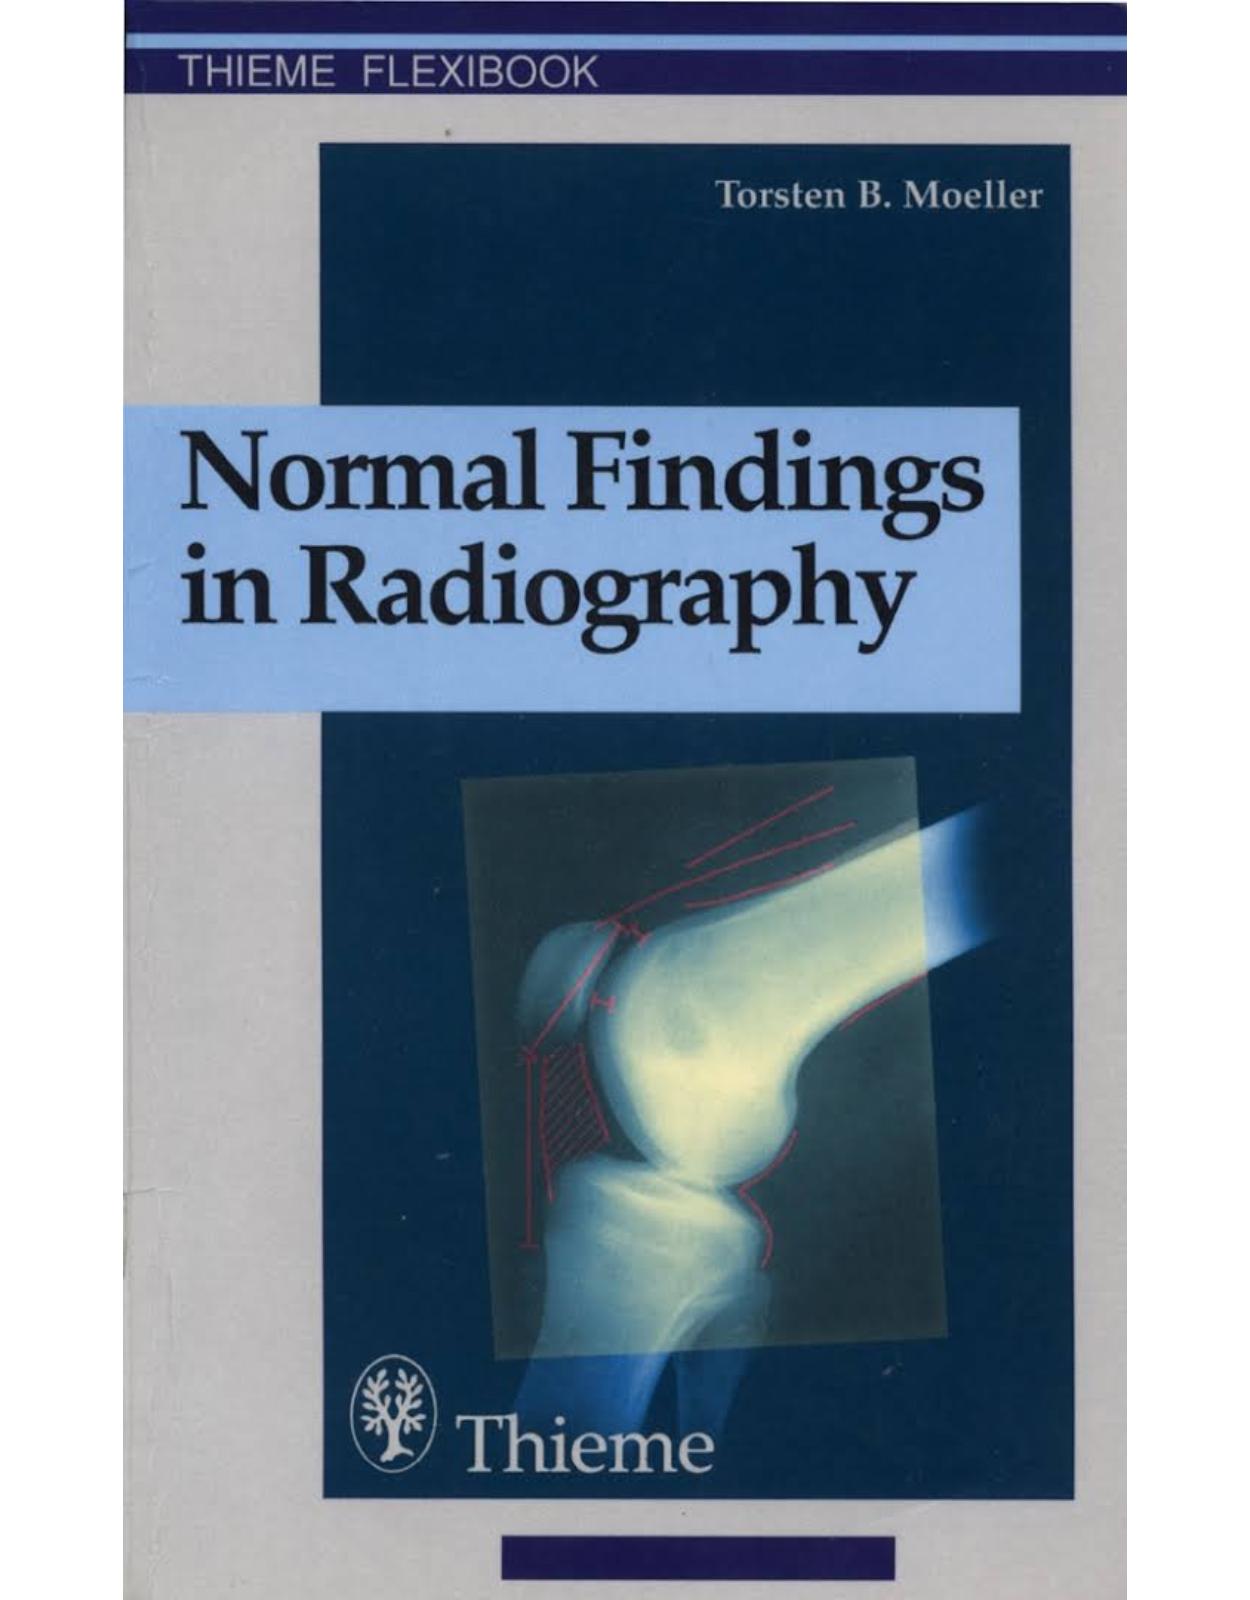 Normal Findings in Radiography